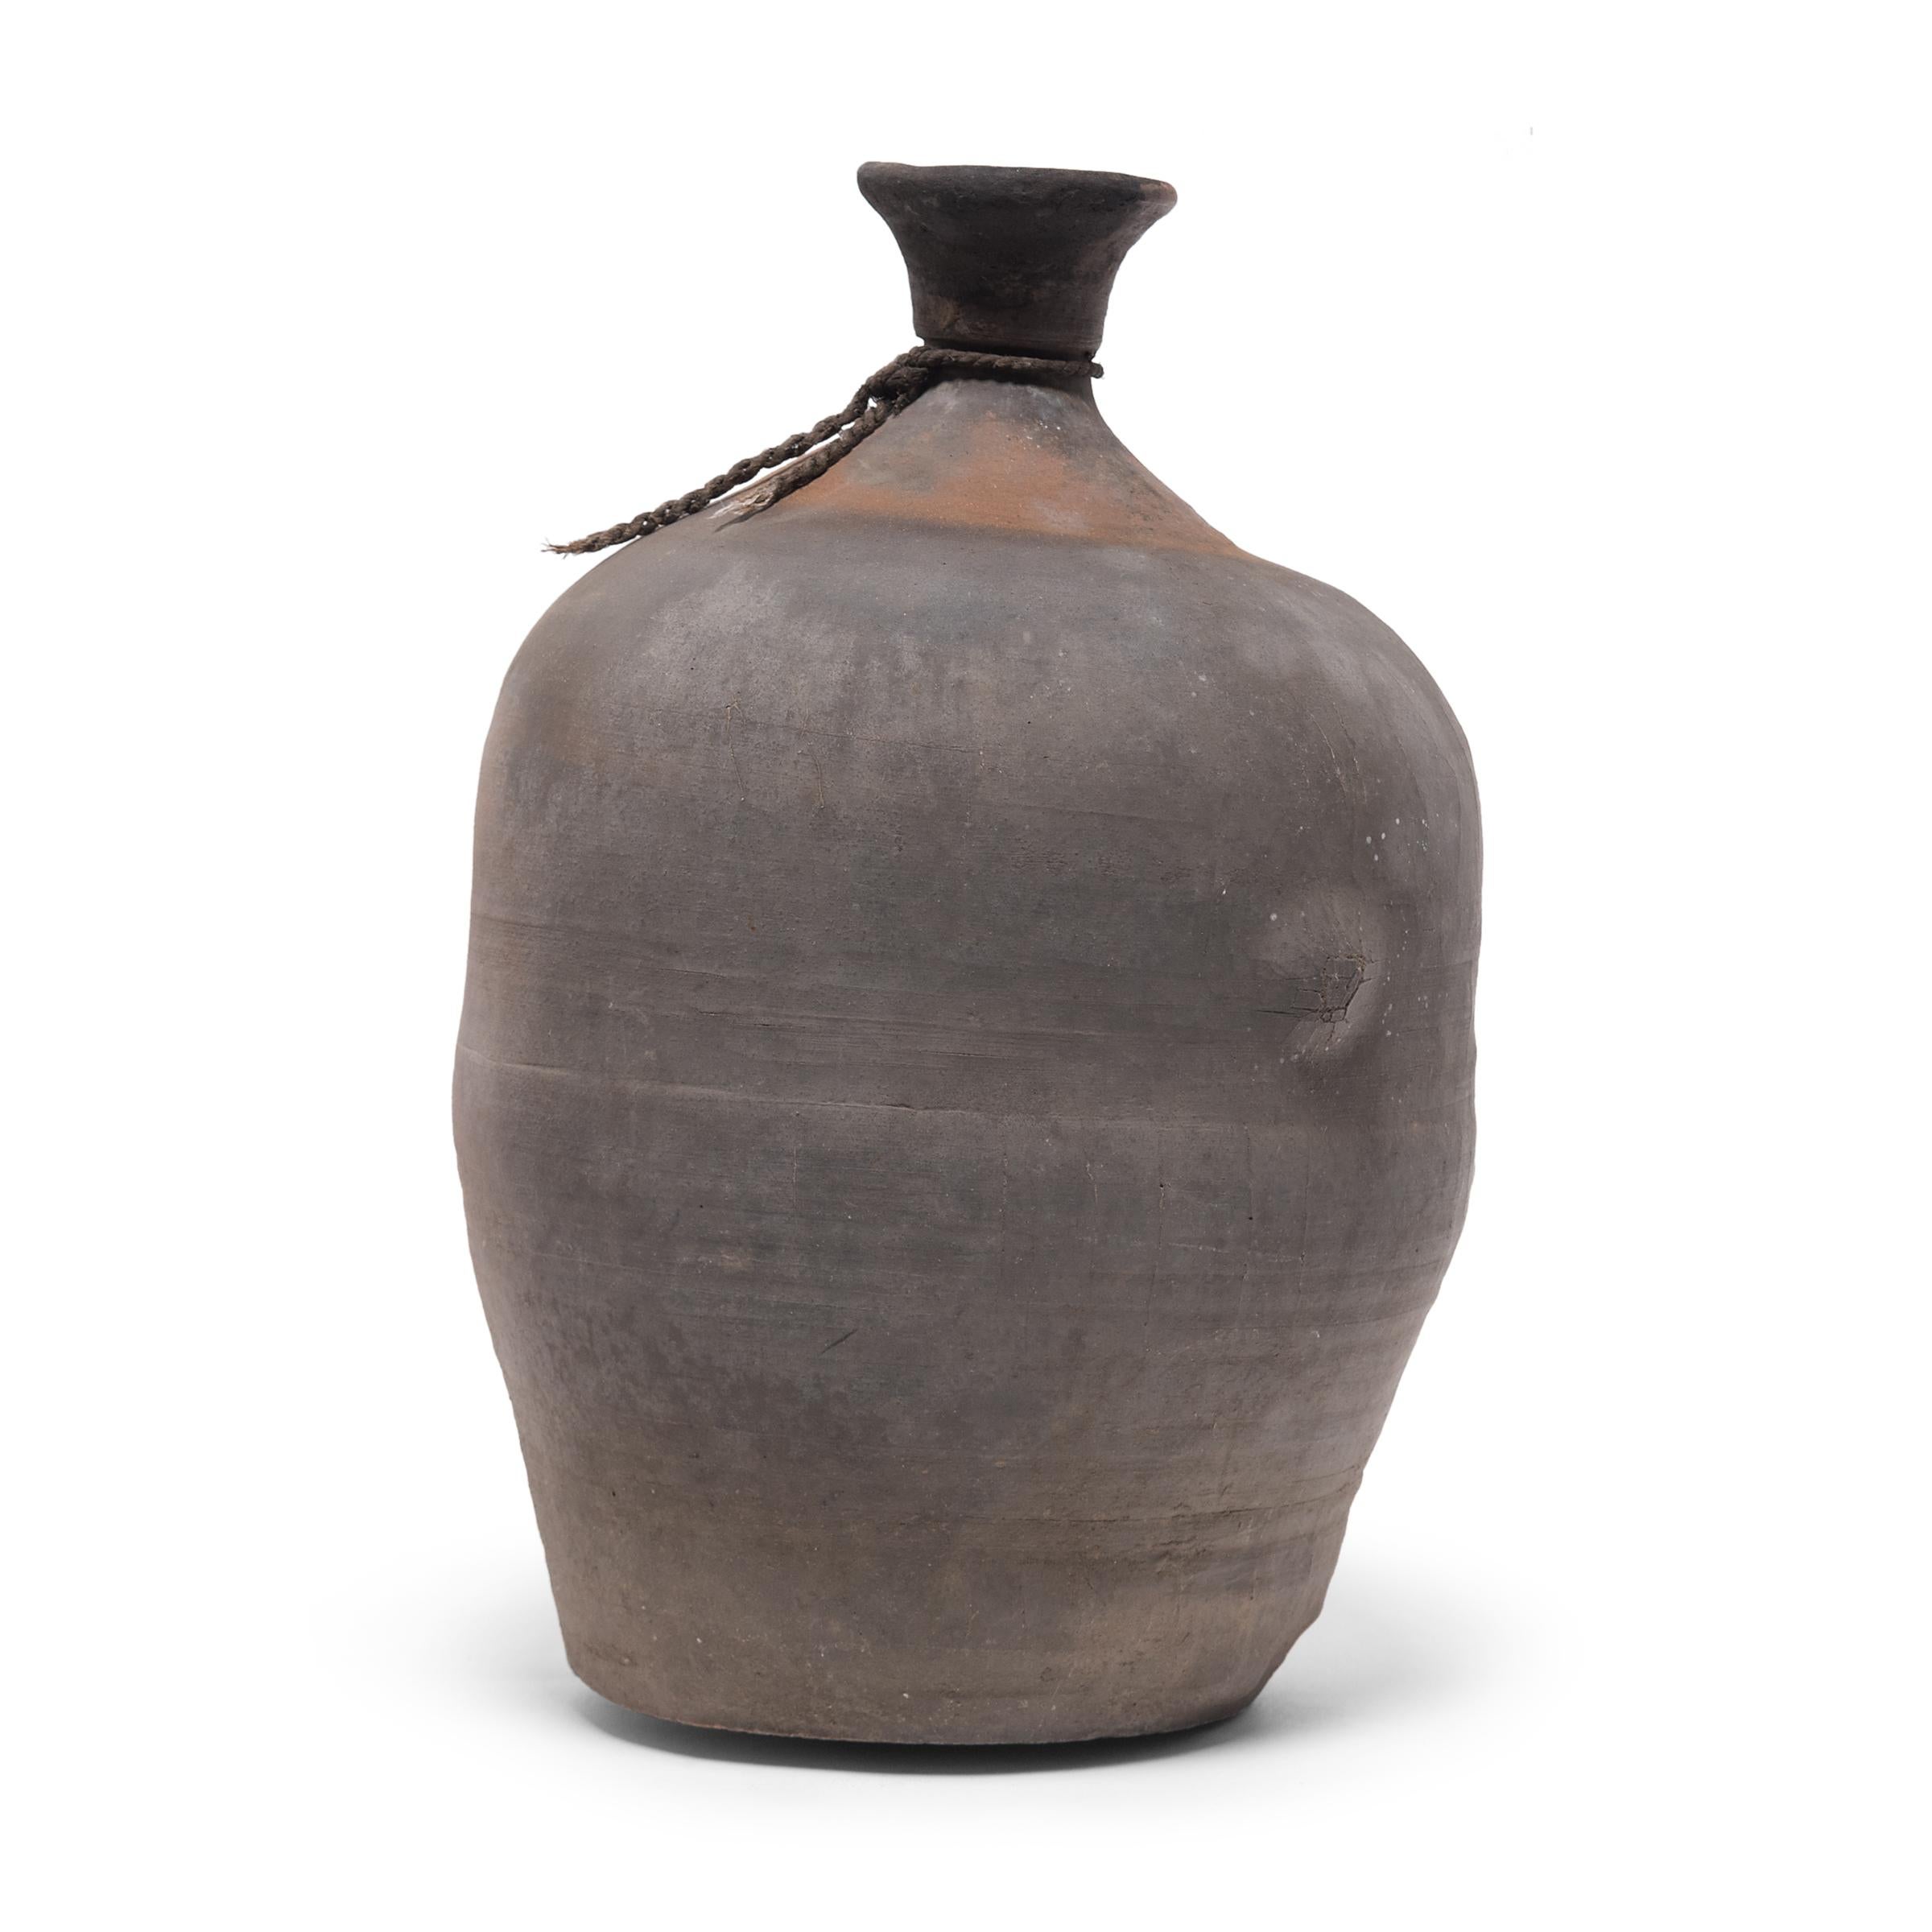 This ceramic jar from China's Shandong province has a bottle-neck shape meant for storing vinegar or wine made from rice and grain. Dated to the early 20th century, the jar was likely created to store wine for commercial sale and would have been